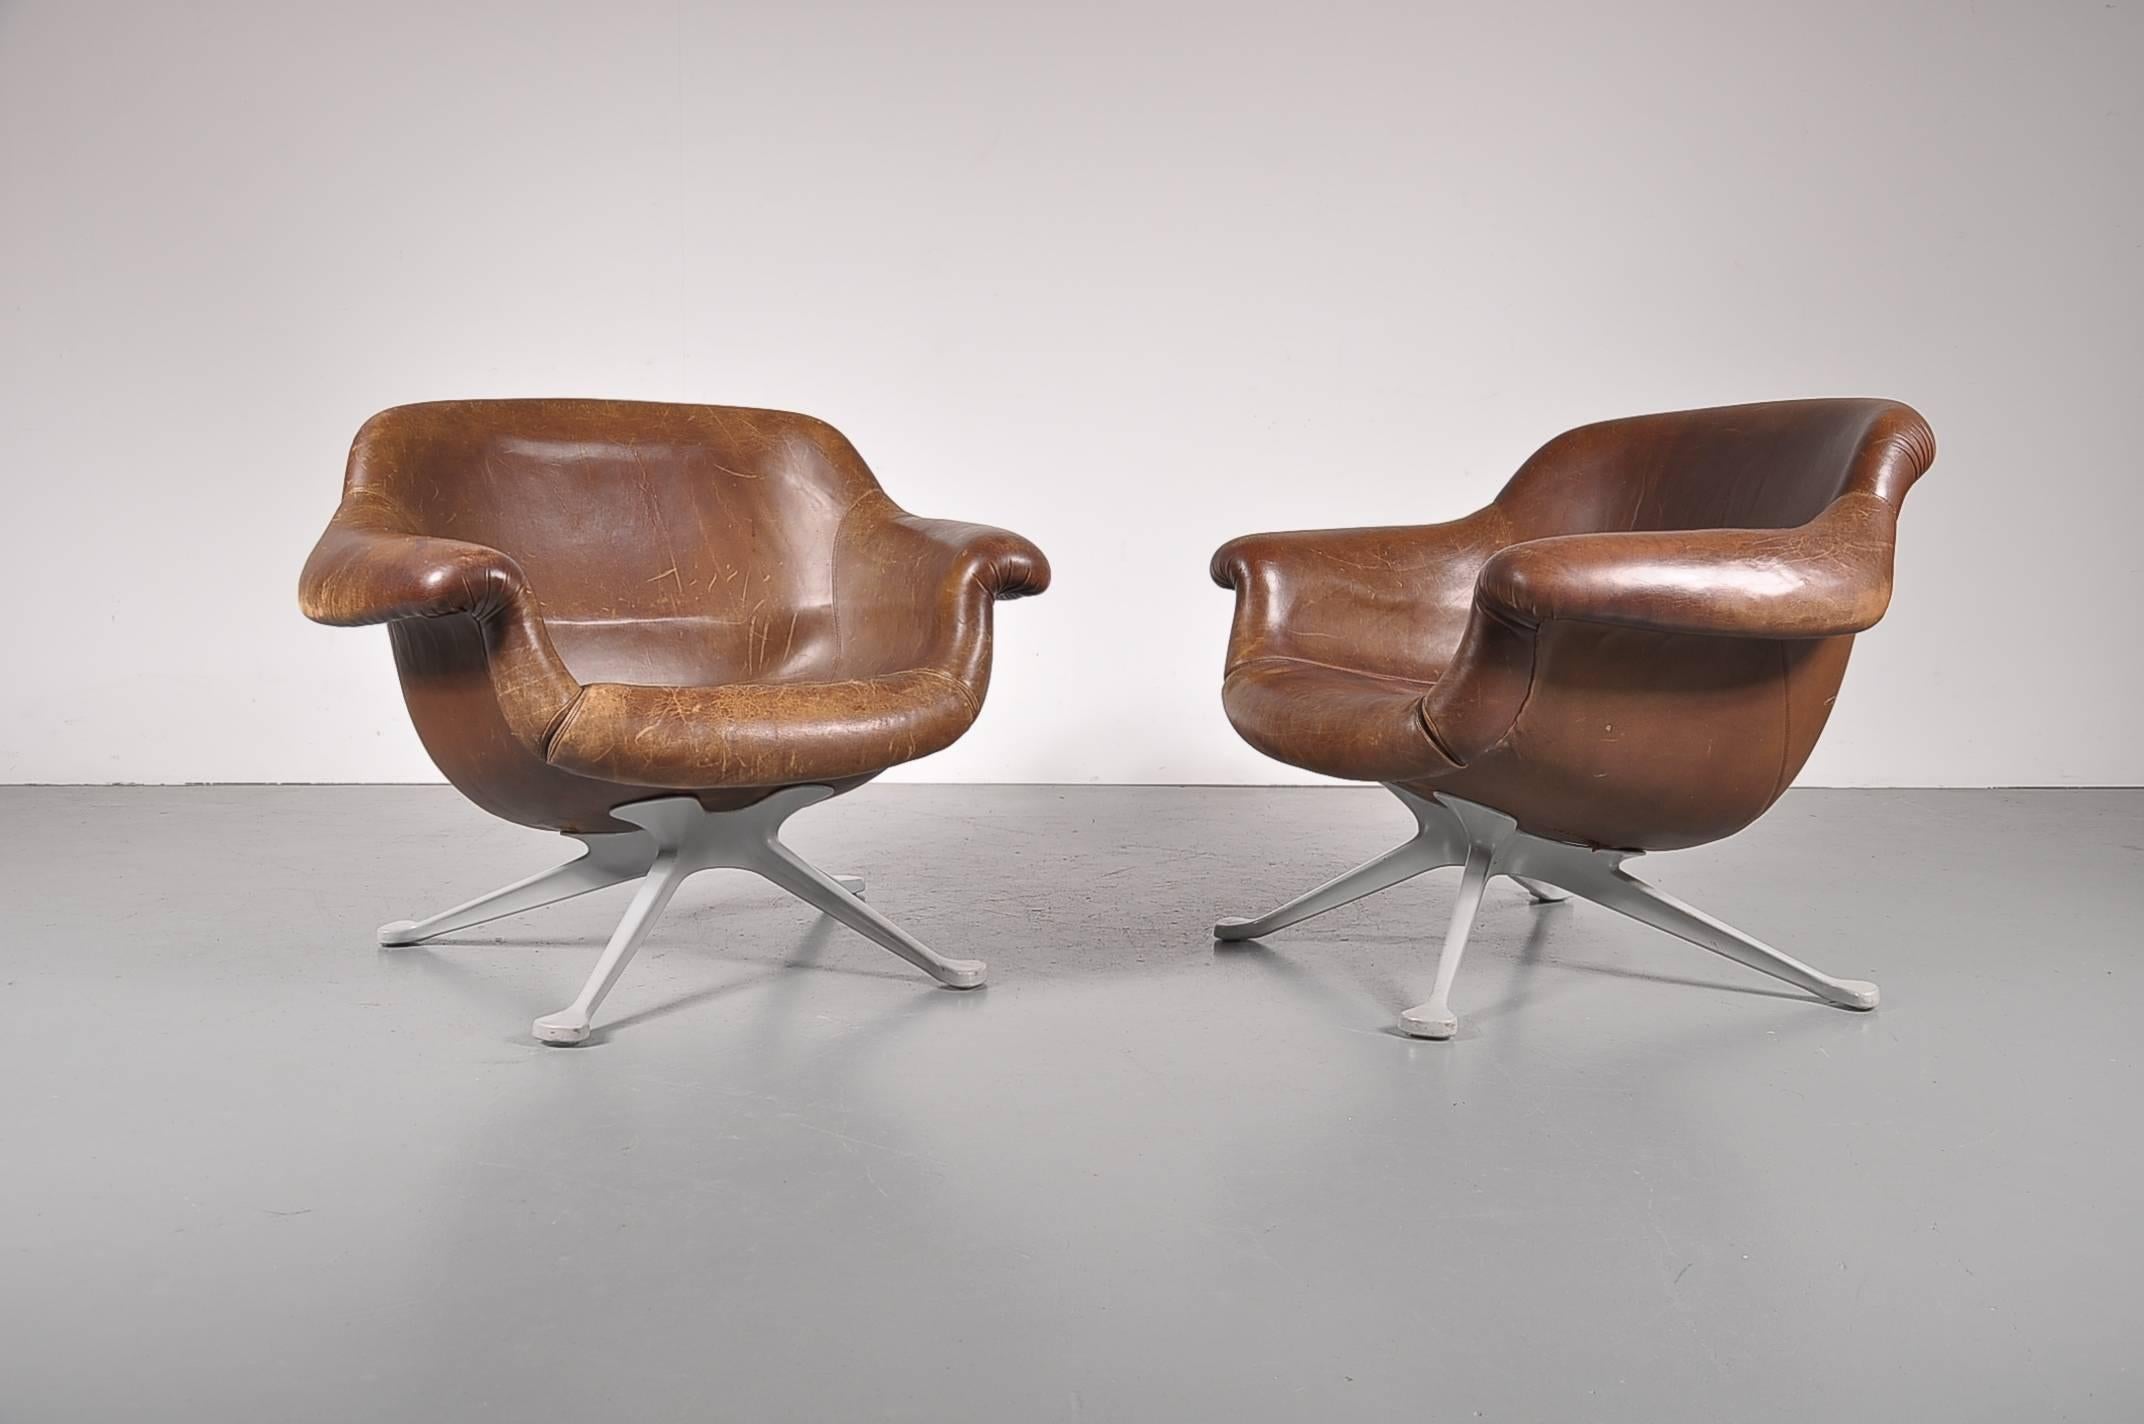 A pair of very rare lounge chairs designed by Angelo Mangiarotti, manufactured by Cassina in Italy, circa 1960.

This model, nr. 1110, is extremely hard to find and absolutely stunning. The chairs have a high quality grey aluminium base and are